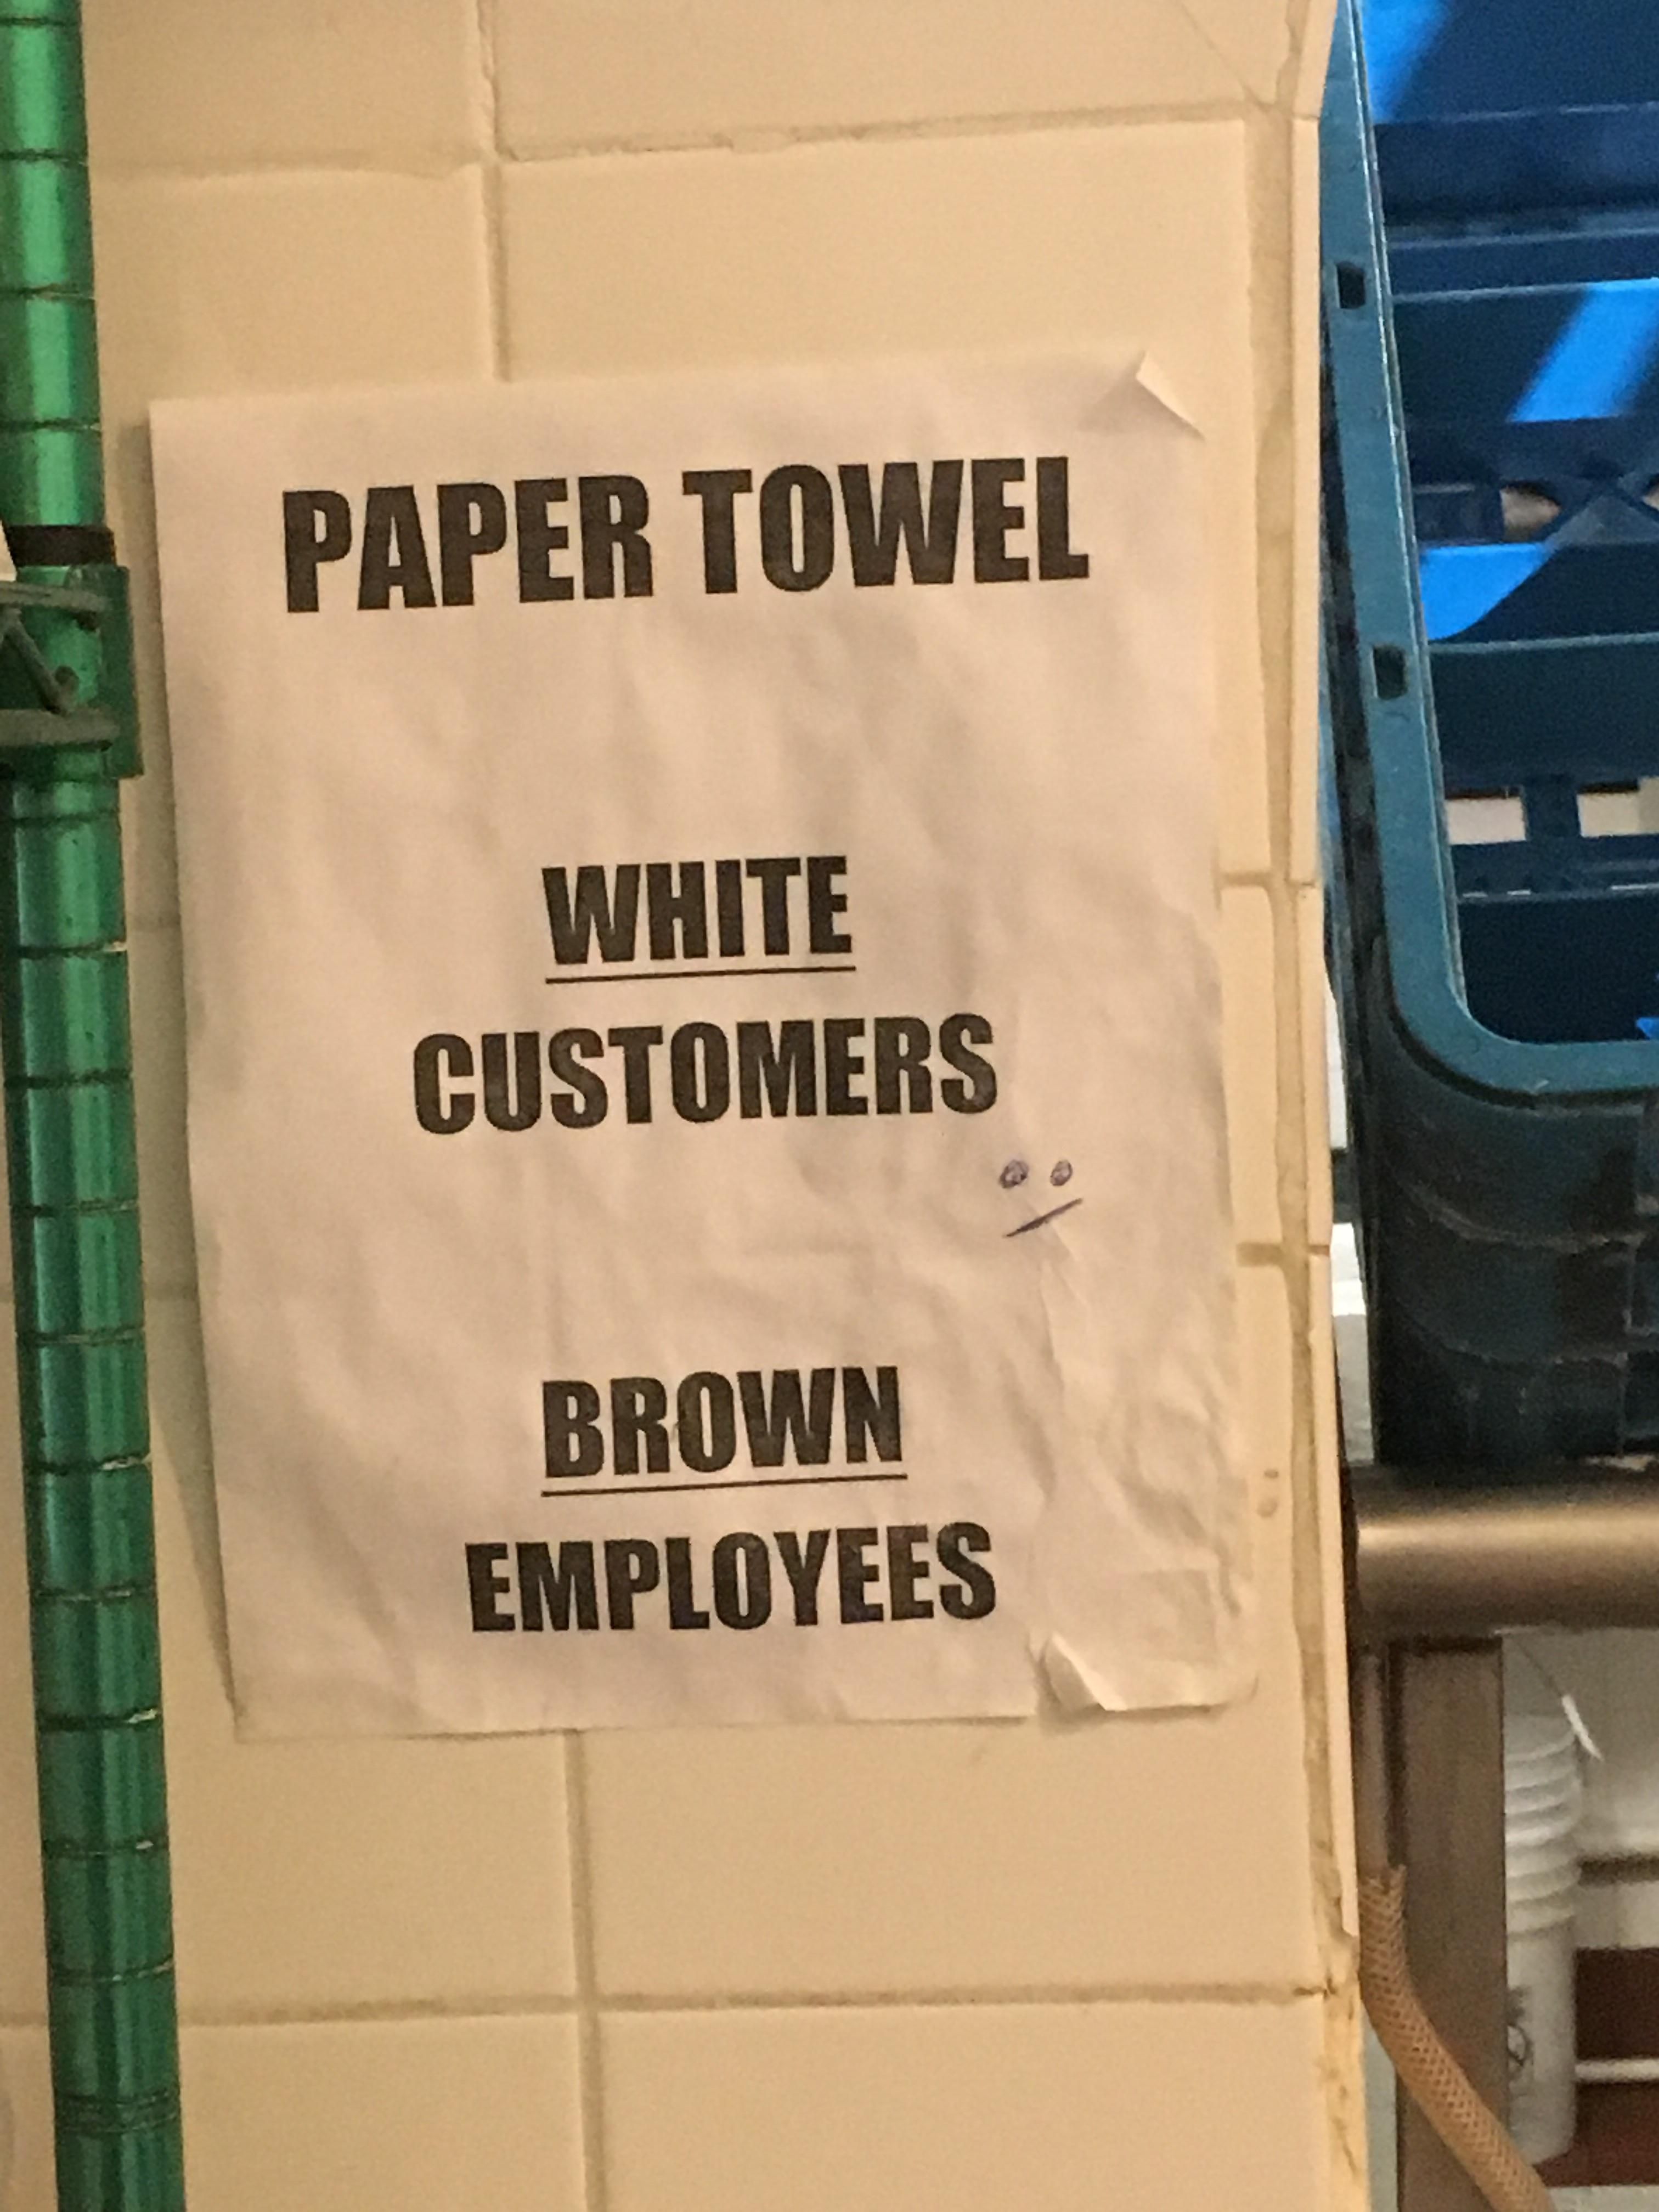 I work at a Mexican restaurant in Virginia. Had to do a double take when I saw this sign and didn’t read the top part first.